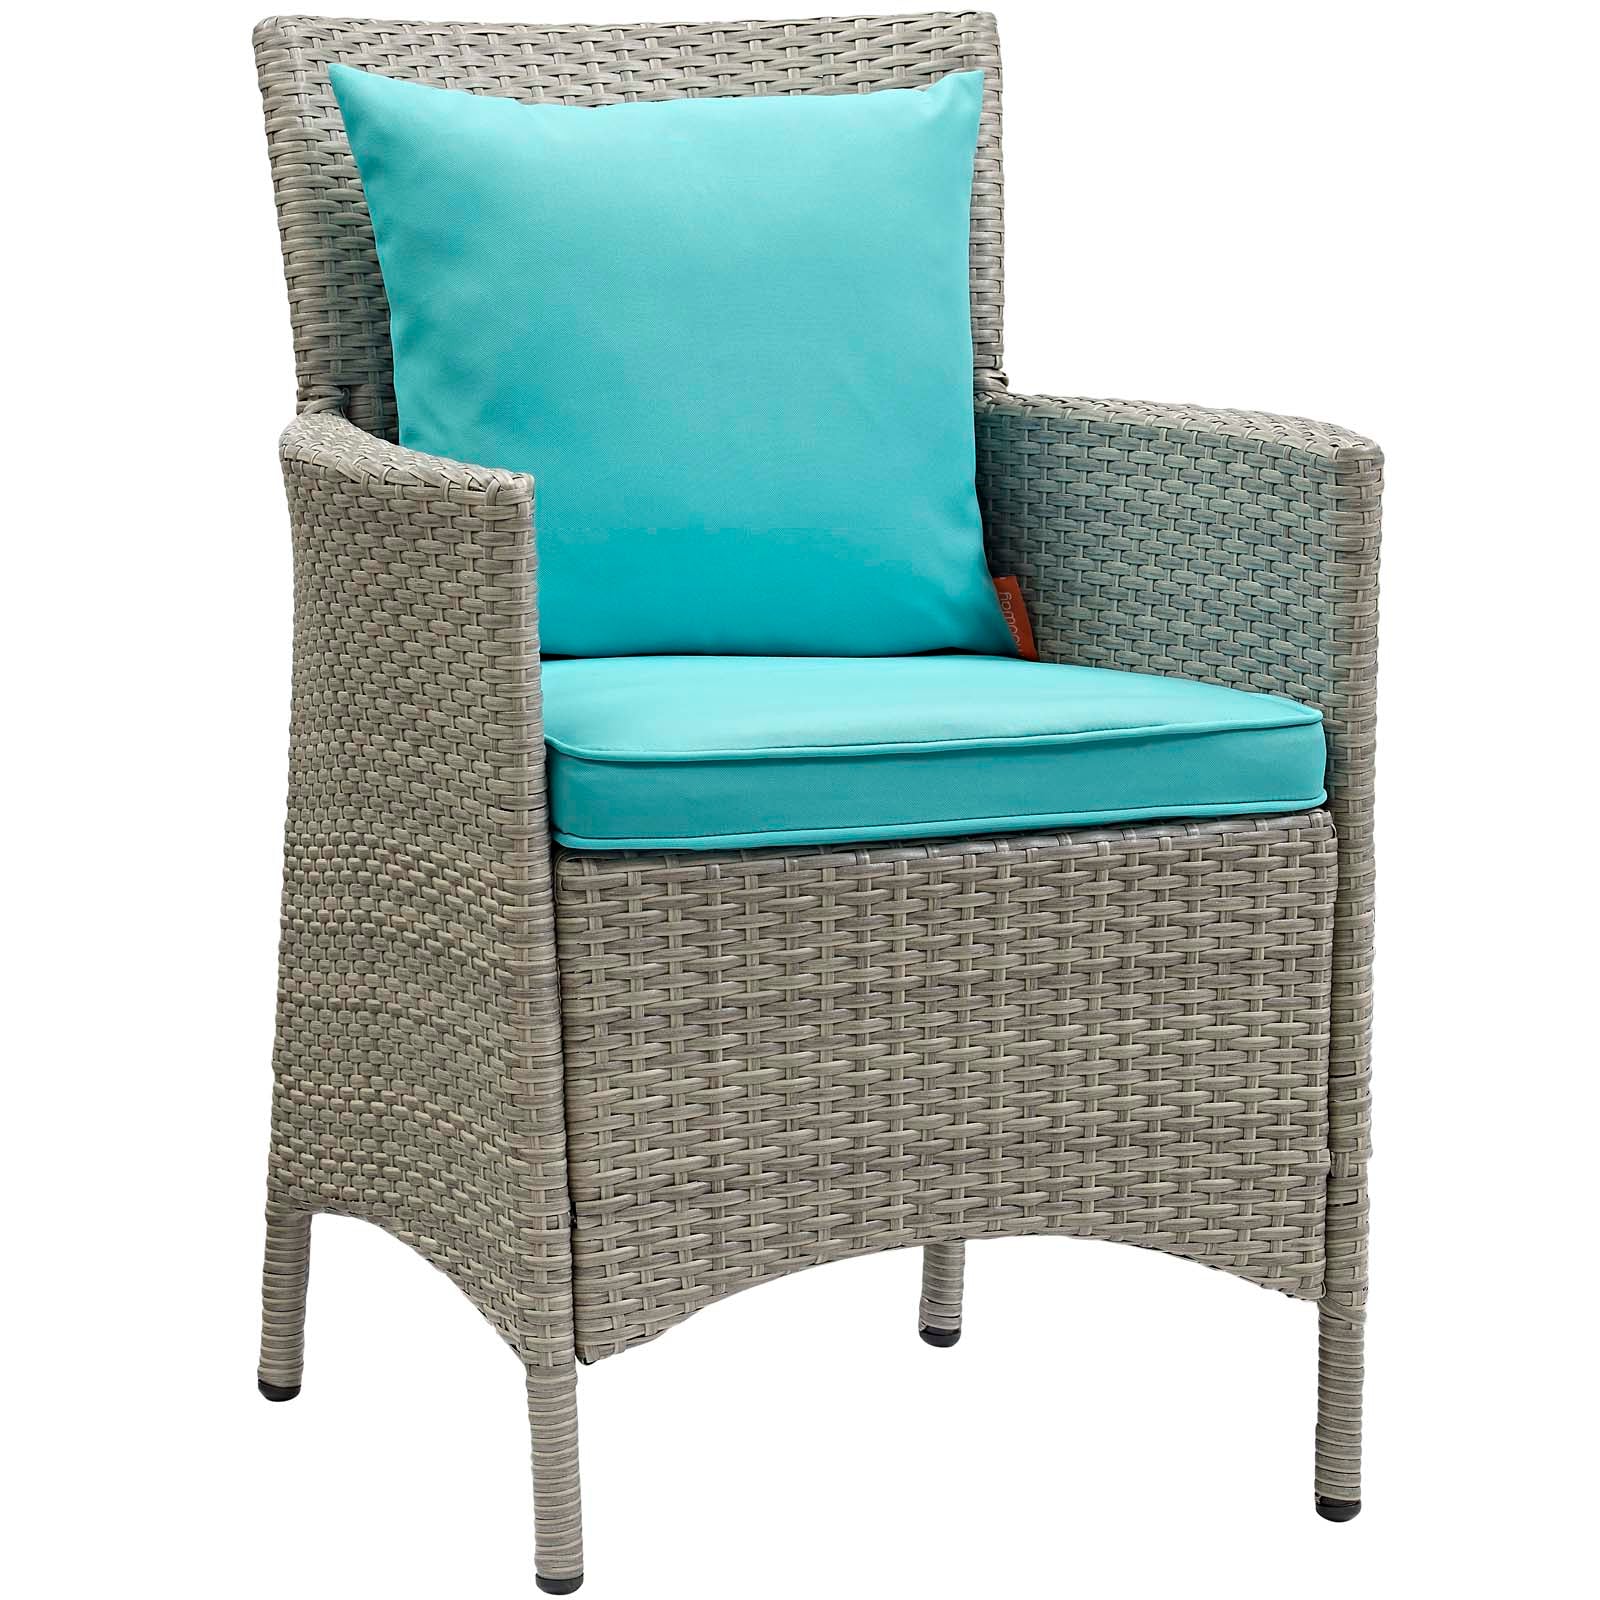 Modway Outdoor Dining Sets - Conduit 5 Piece Outdoor Patio Wicker Rattan Dining Set Light Gray Turquoise